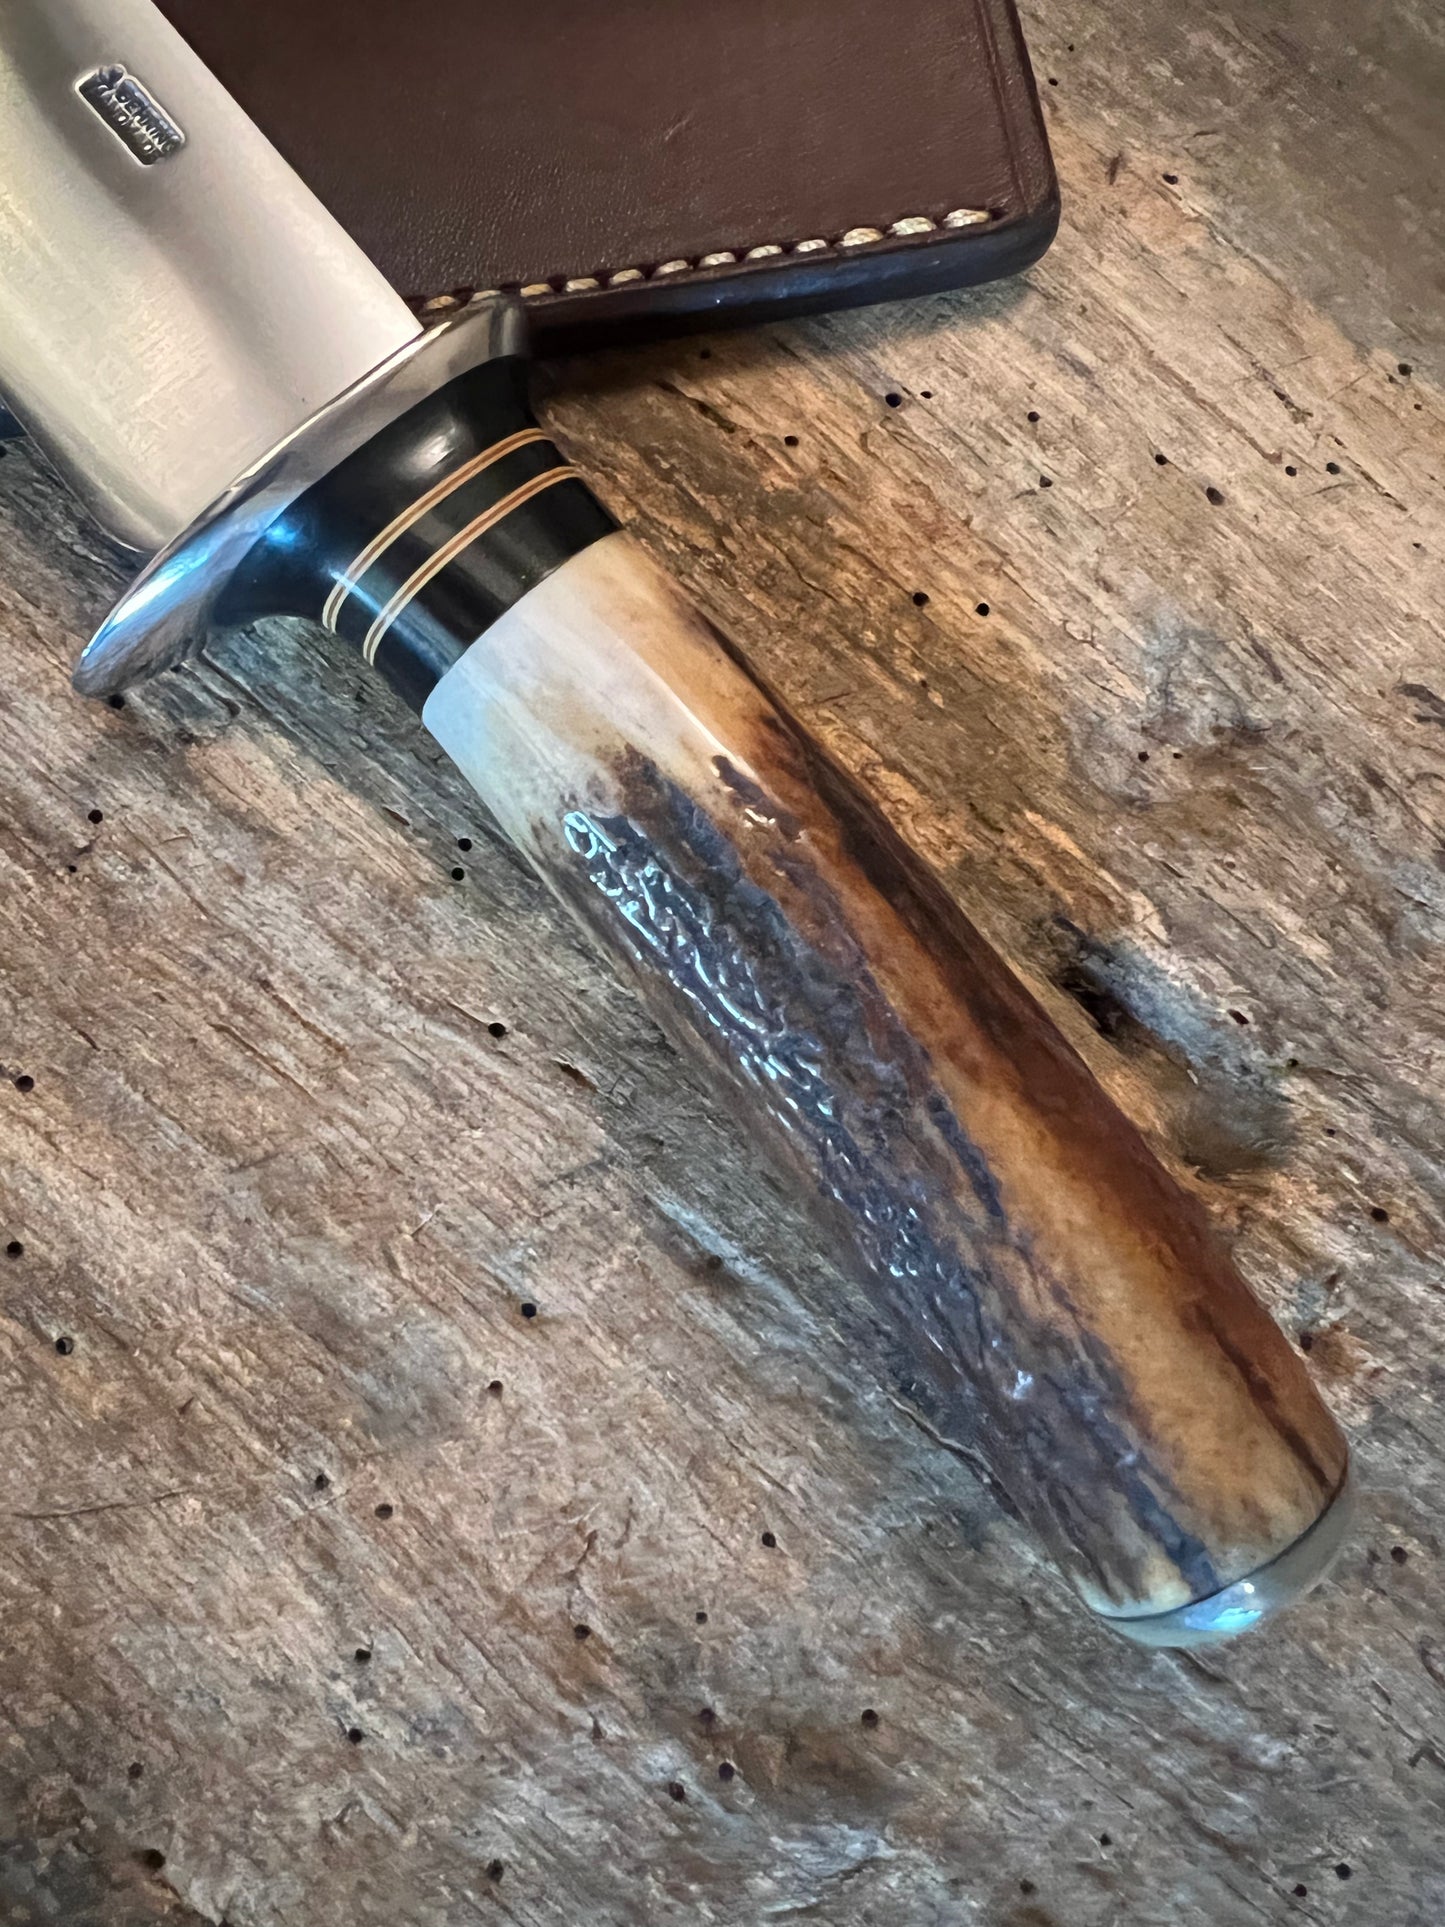 J. Behring Handmade Chefs Knife AEB_L Stainless Stag Musk ox